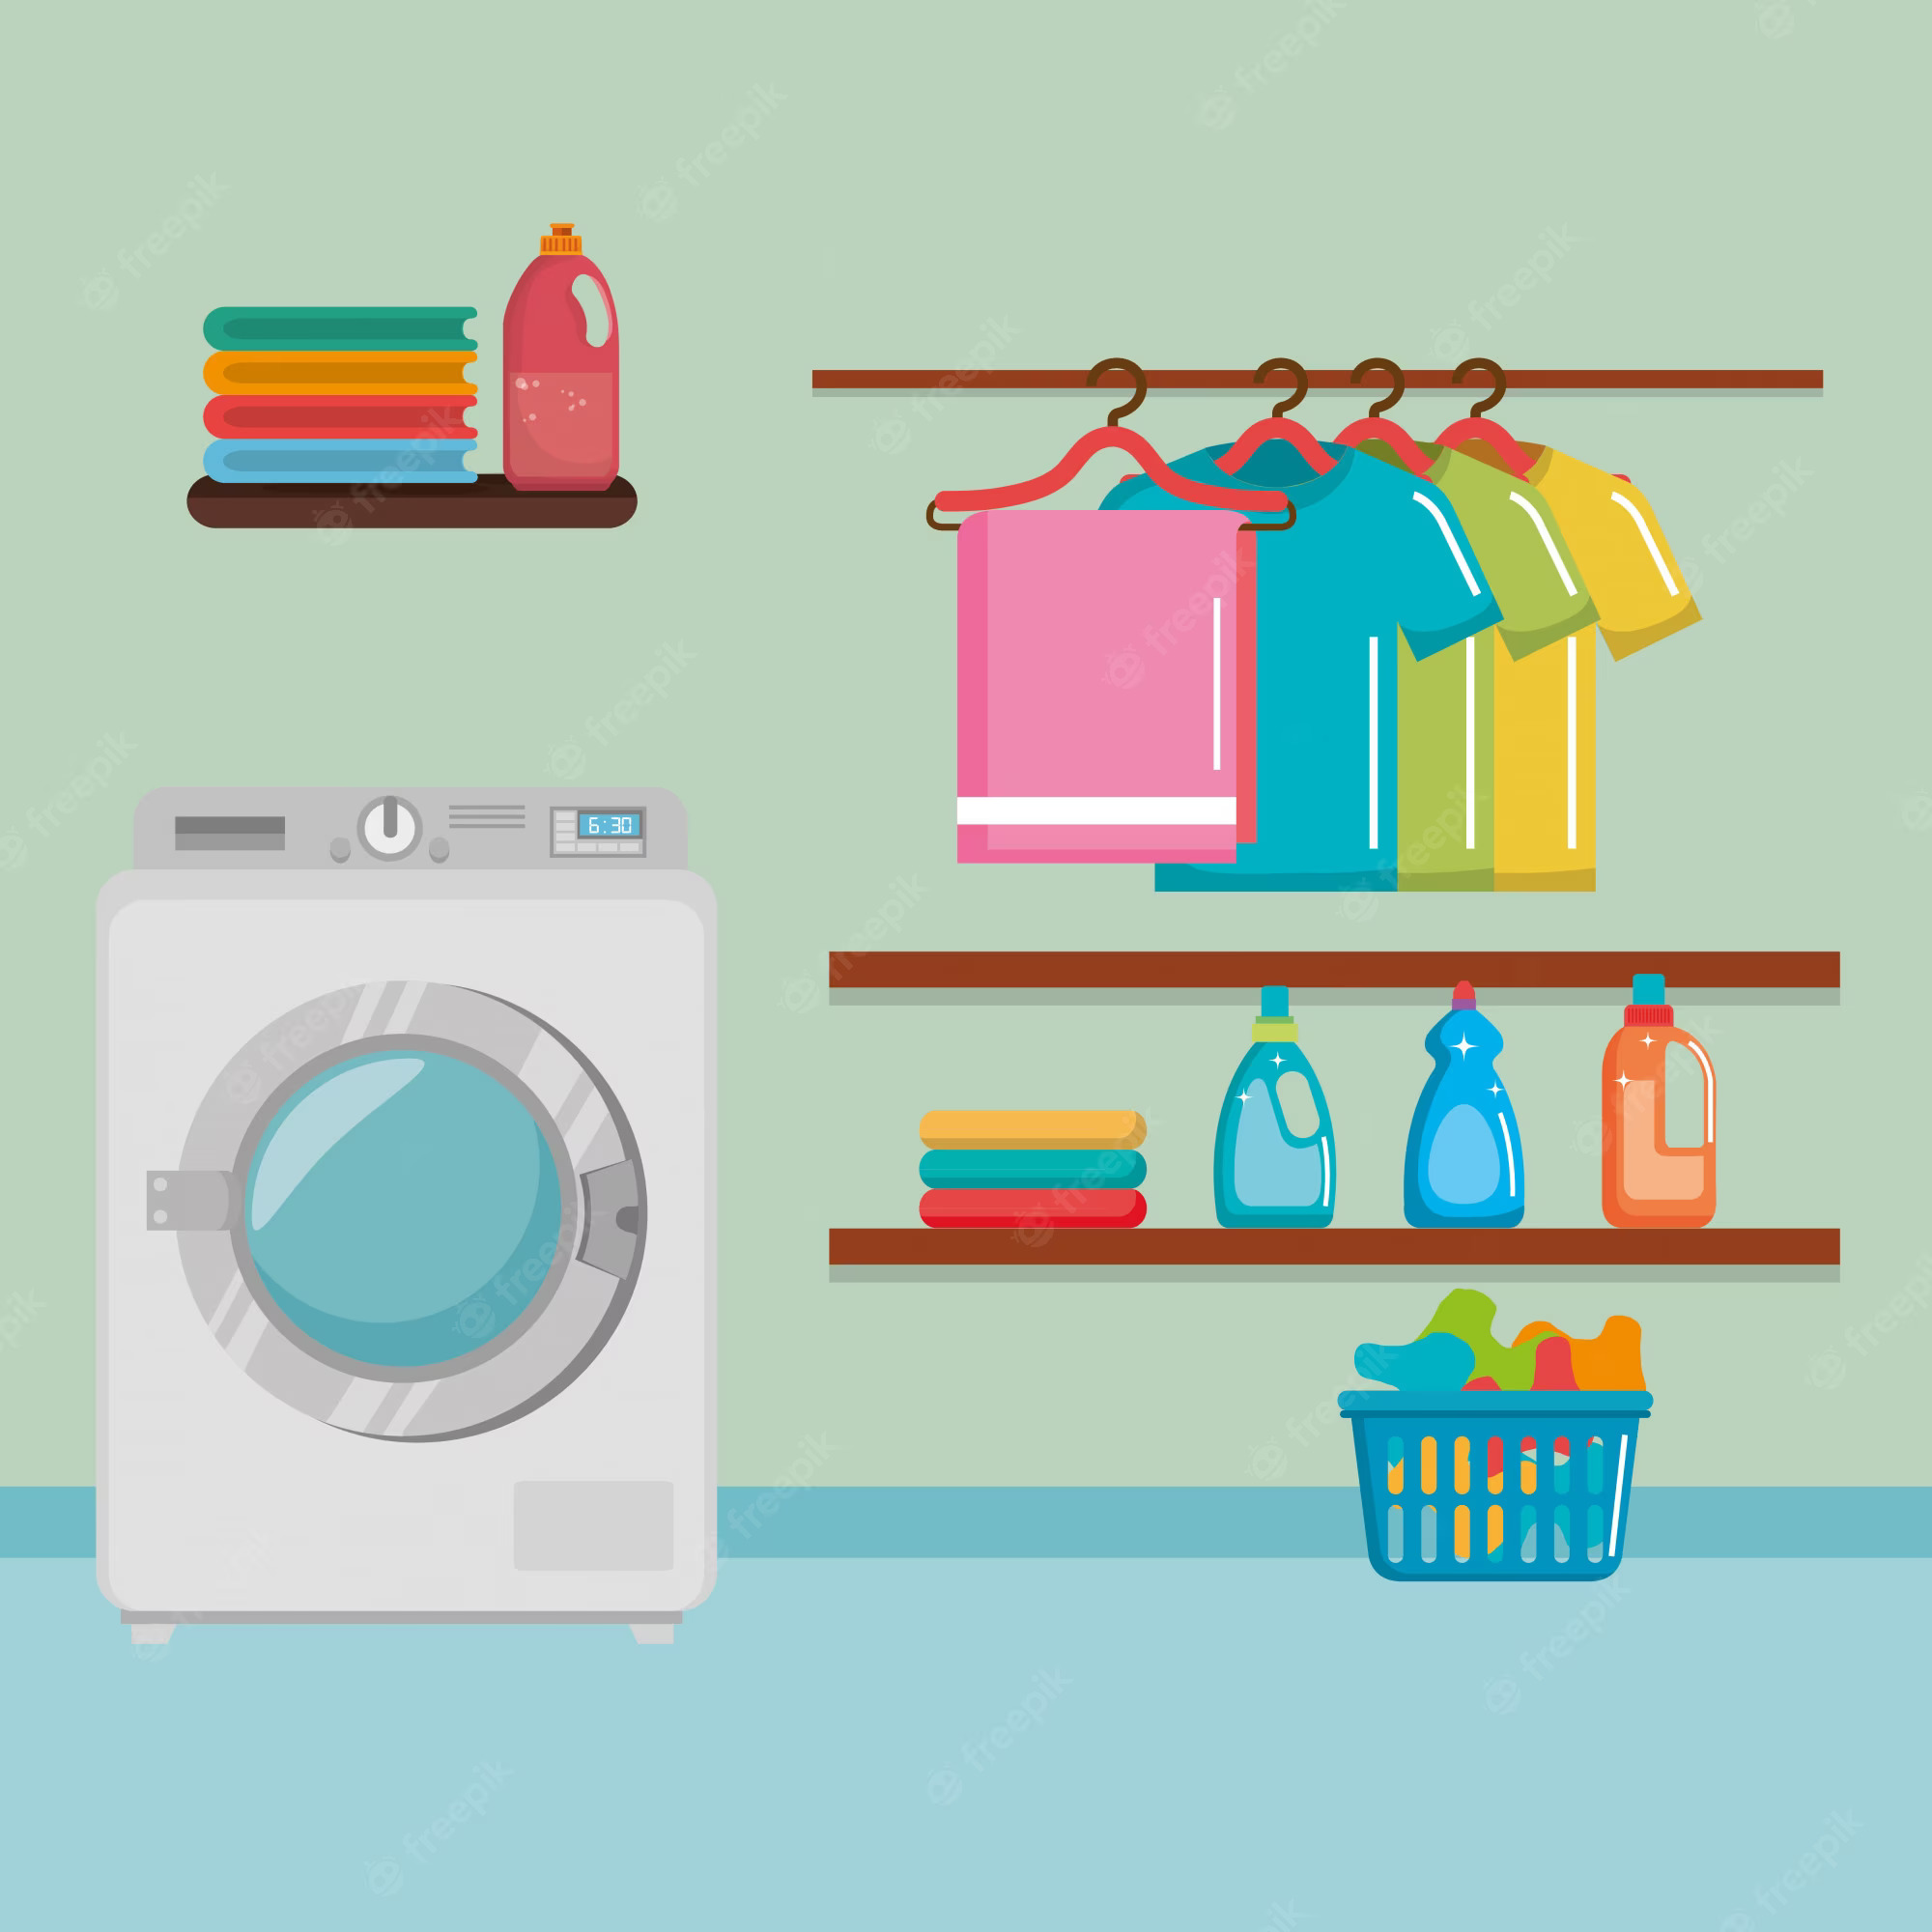 Advantages of RFID Laundry Automation